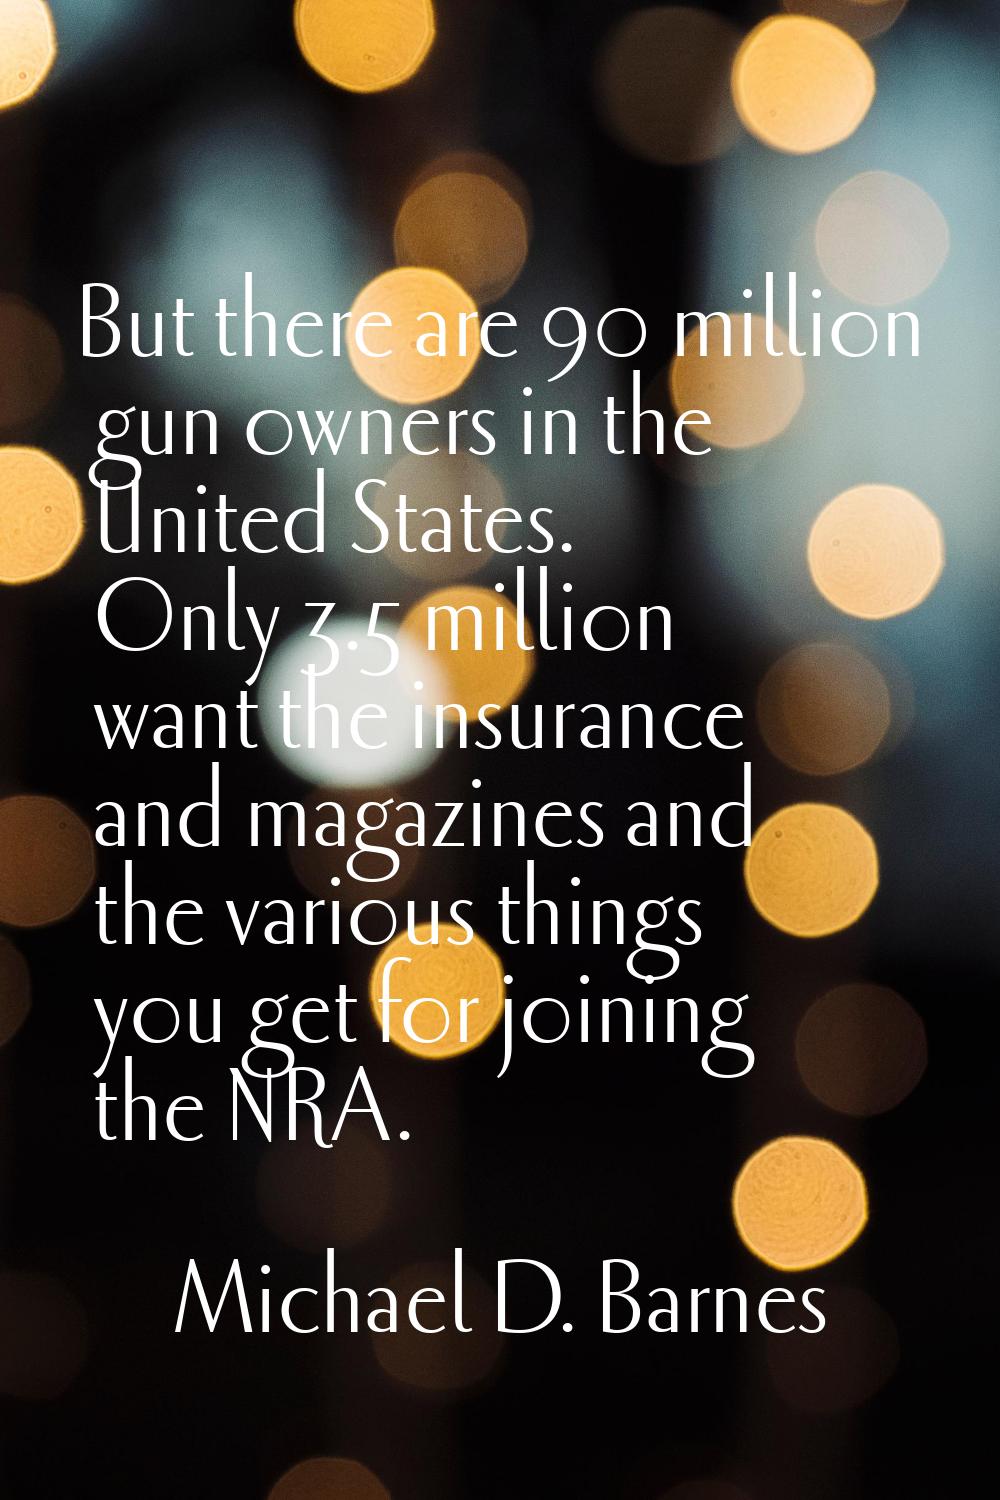 But there are 90 million gun owners in the United States. Only 3.5 million want the insurance and m